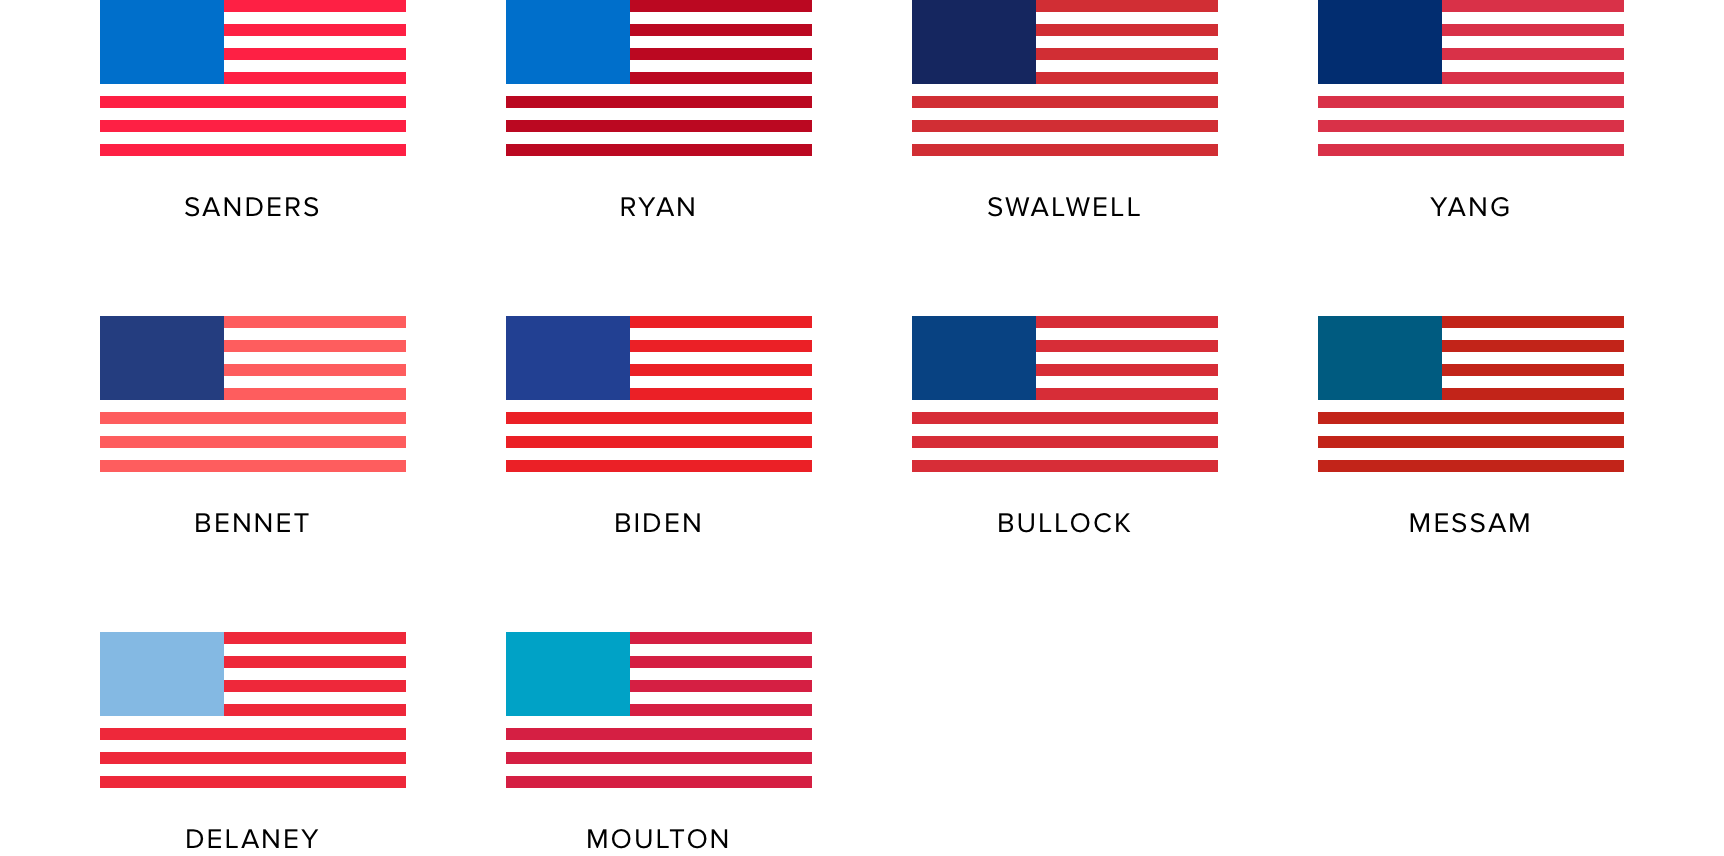 Traditional campaign colors